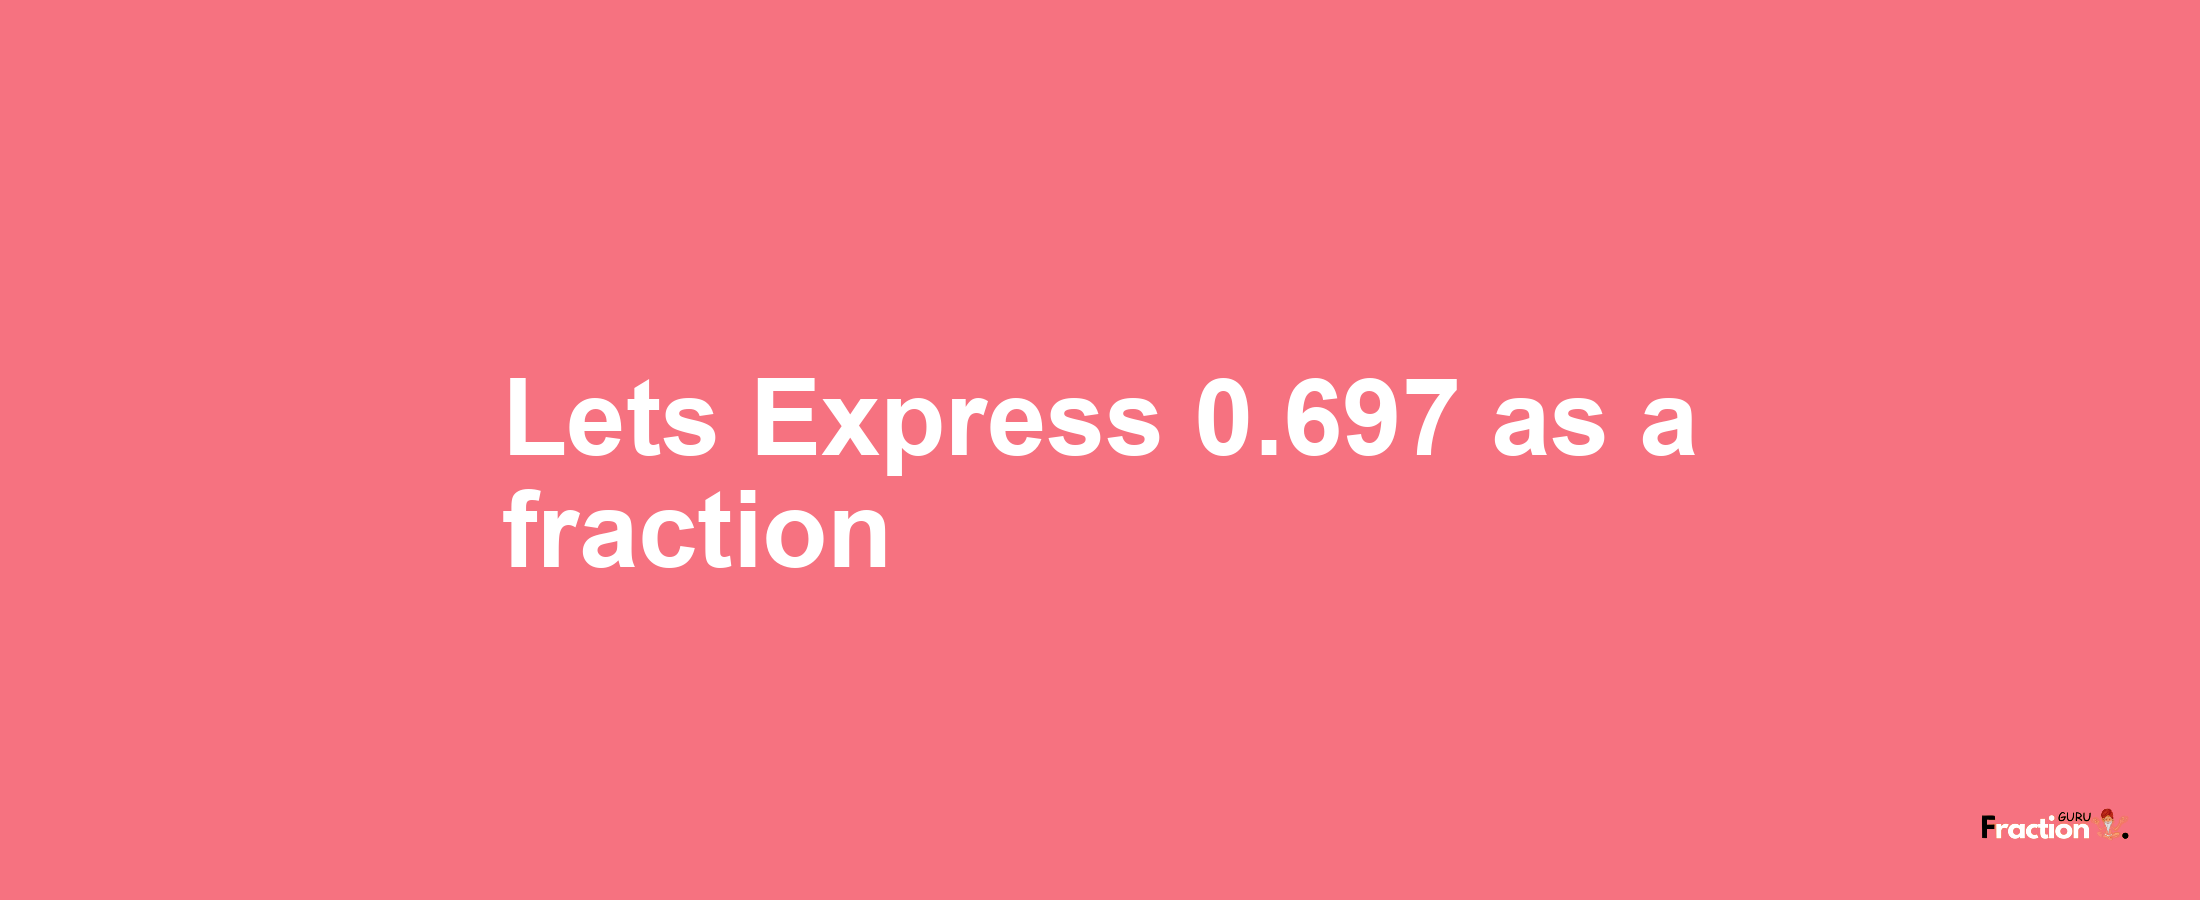 Lets Express 0.697 as afraction